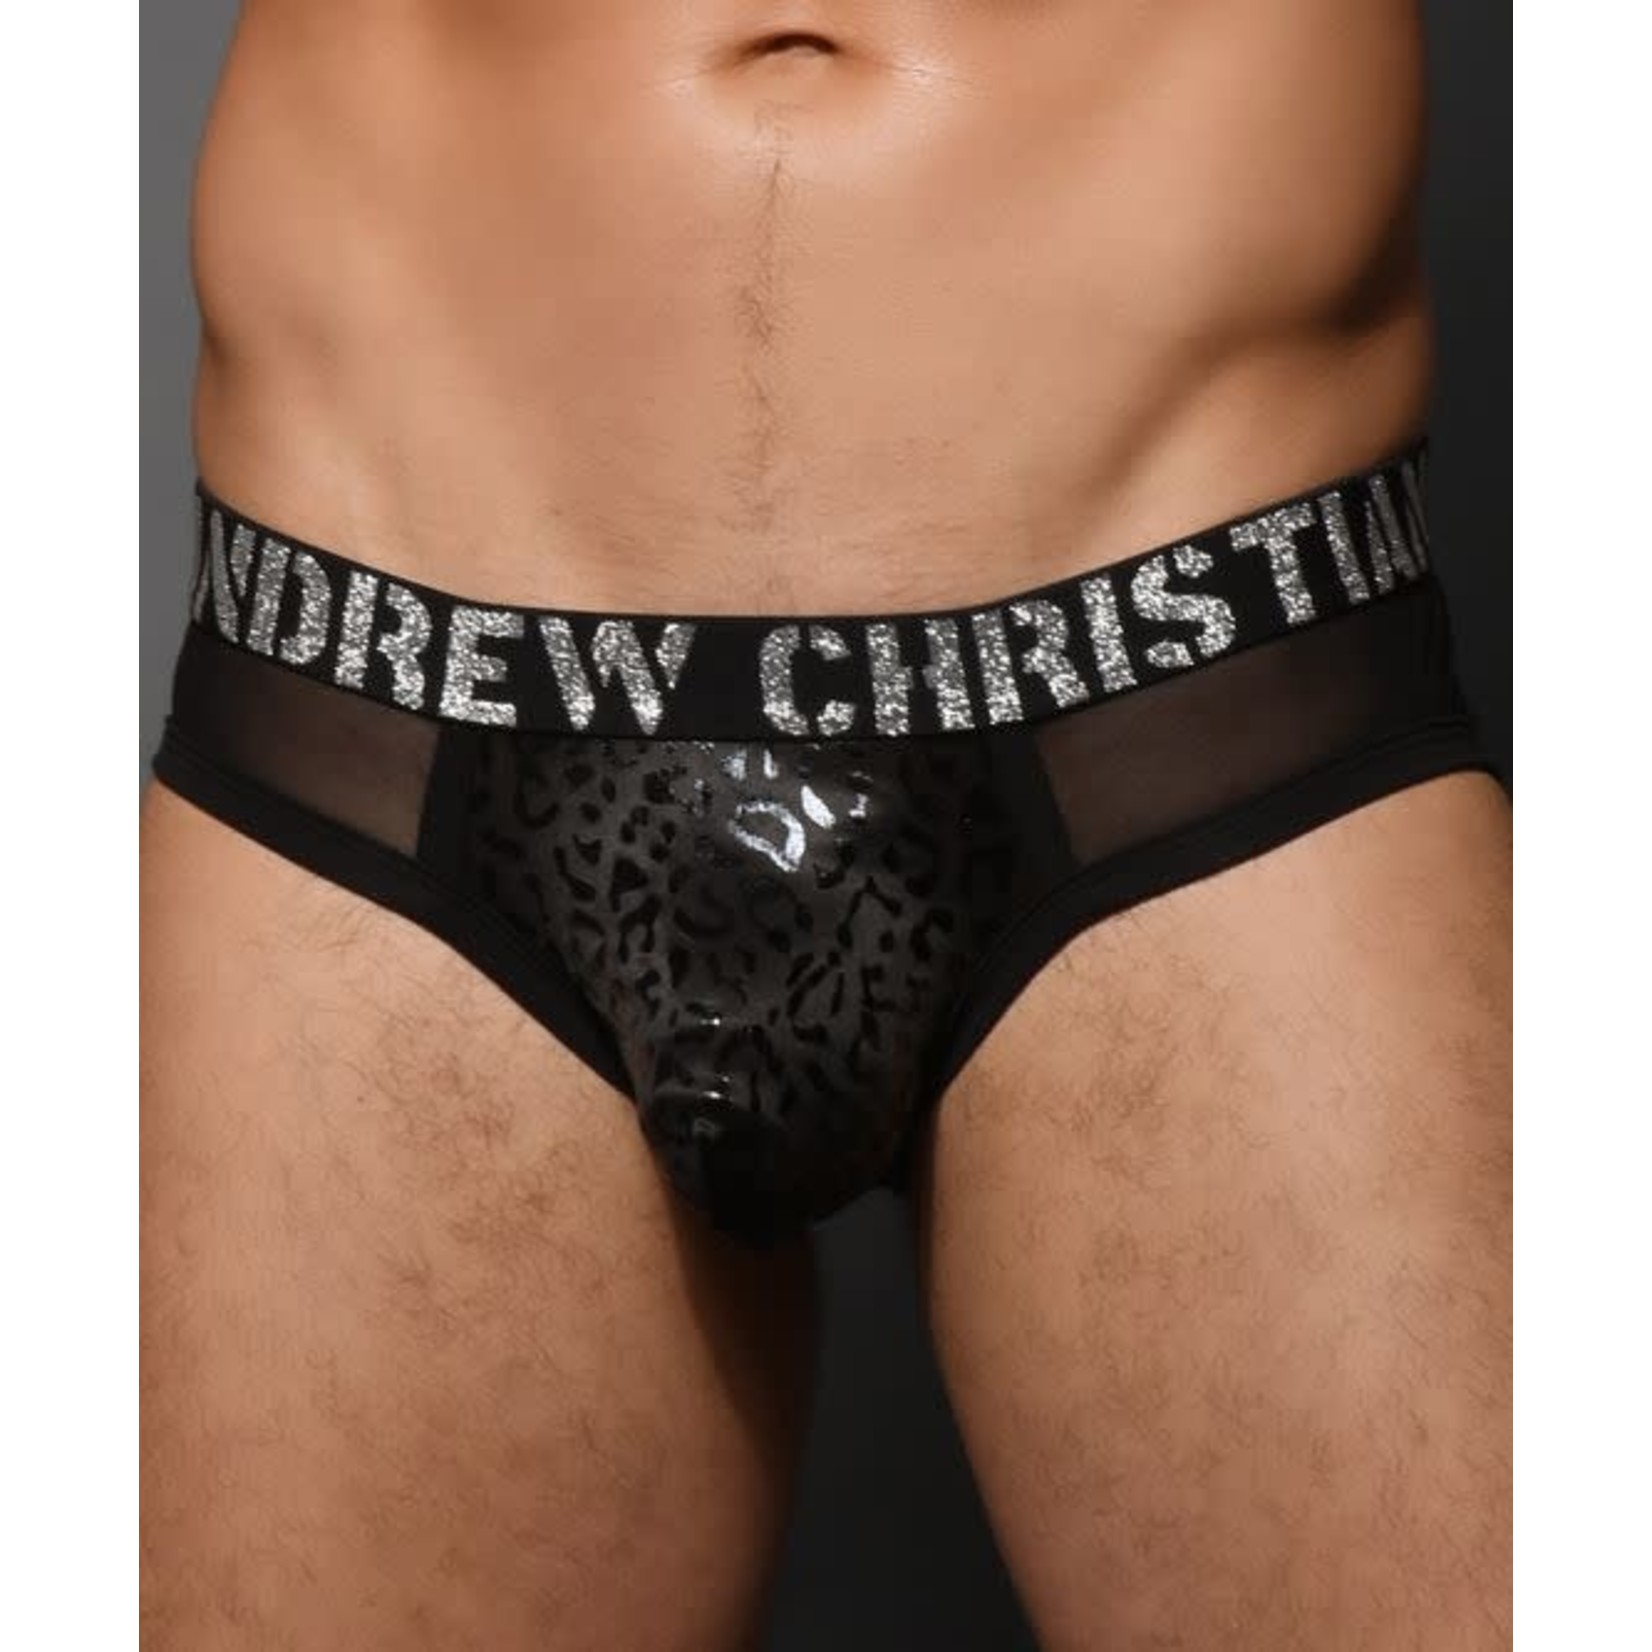 ANDREW CHRISTIAN ANDREW CHRISTIAN - SLICK LEOPARD MESH BRIEF W/ ALMOST NAKED LARGE